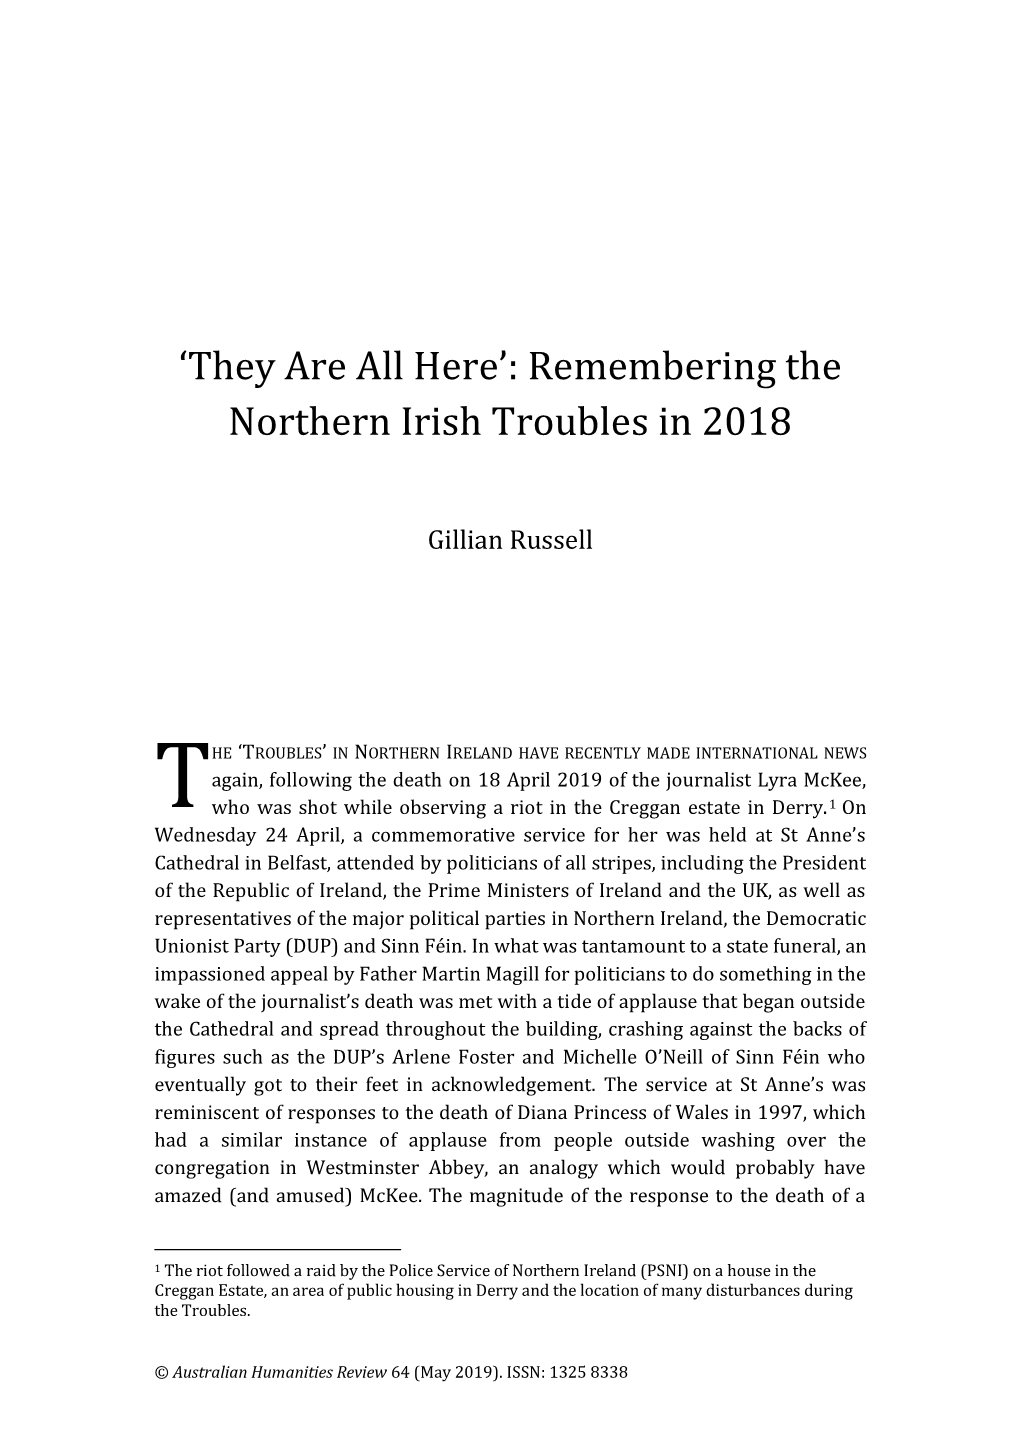 Remembering the Northern Irish Troubles in 2018